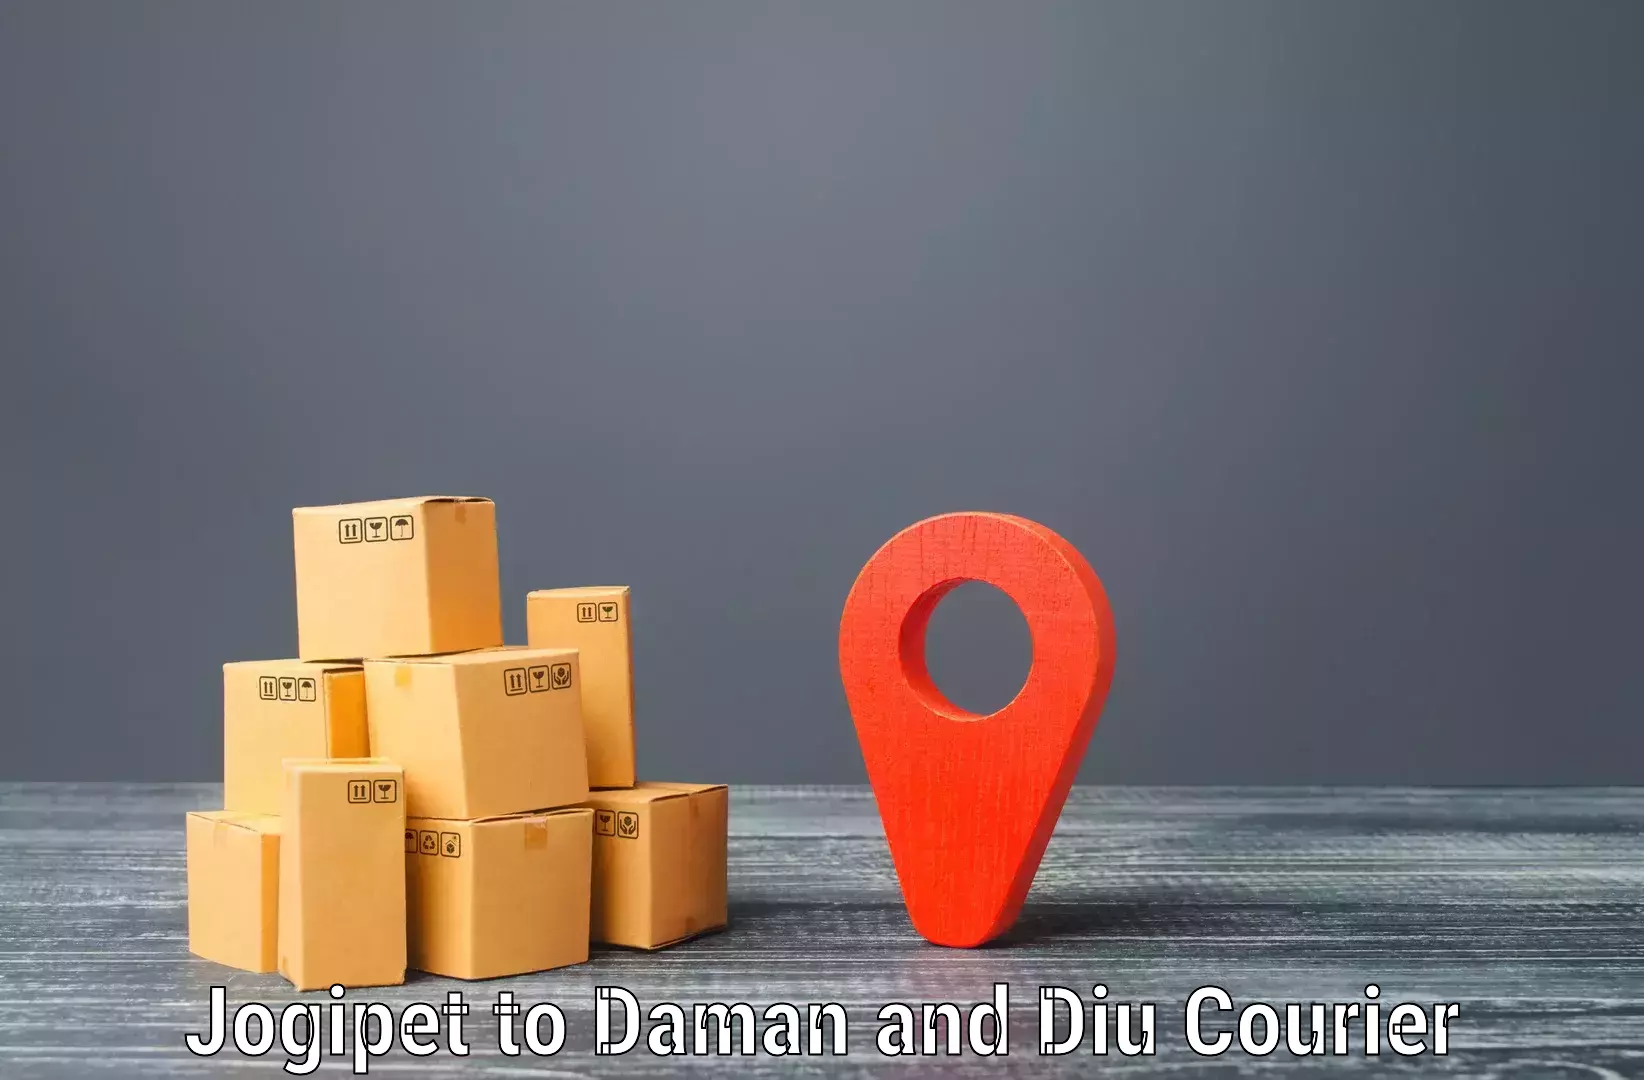 On-demand shipping options Jogipet to Diu